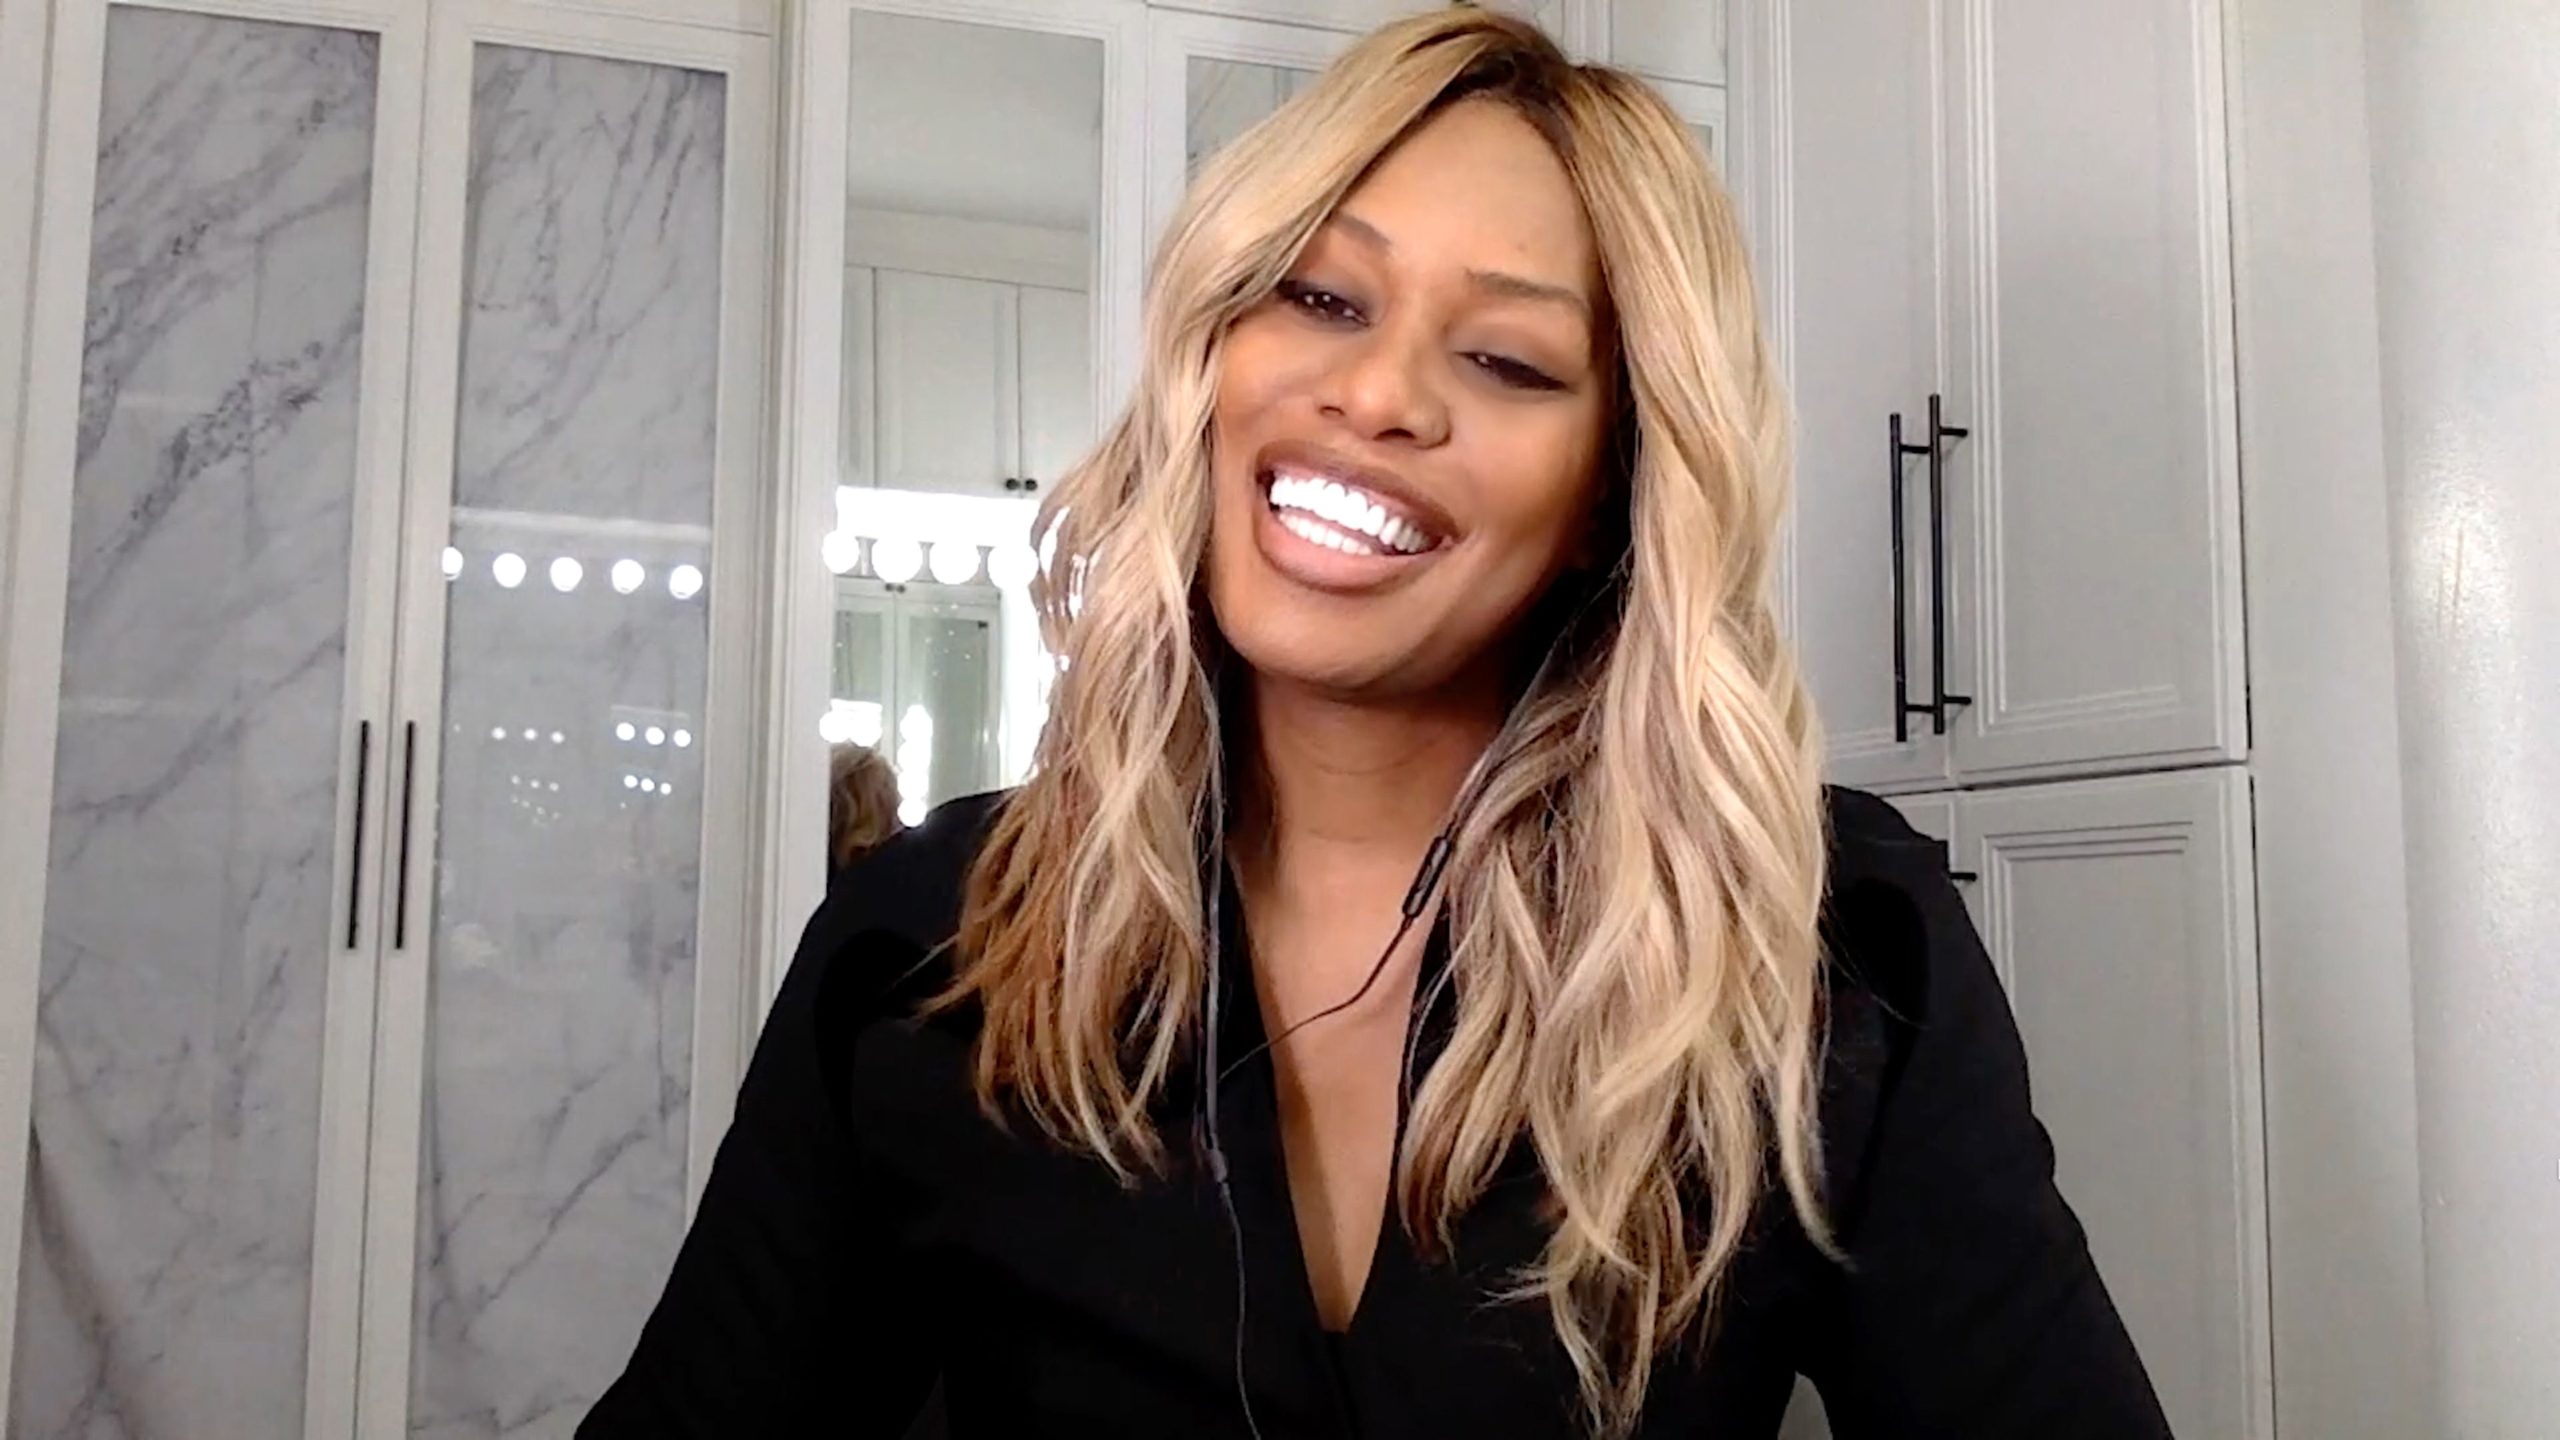 Google TV gets a new TV recommendation system, courtesy of Laverne Cox